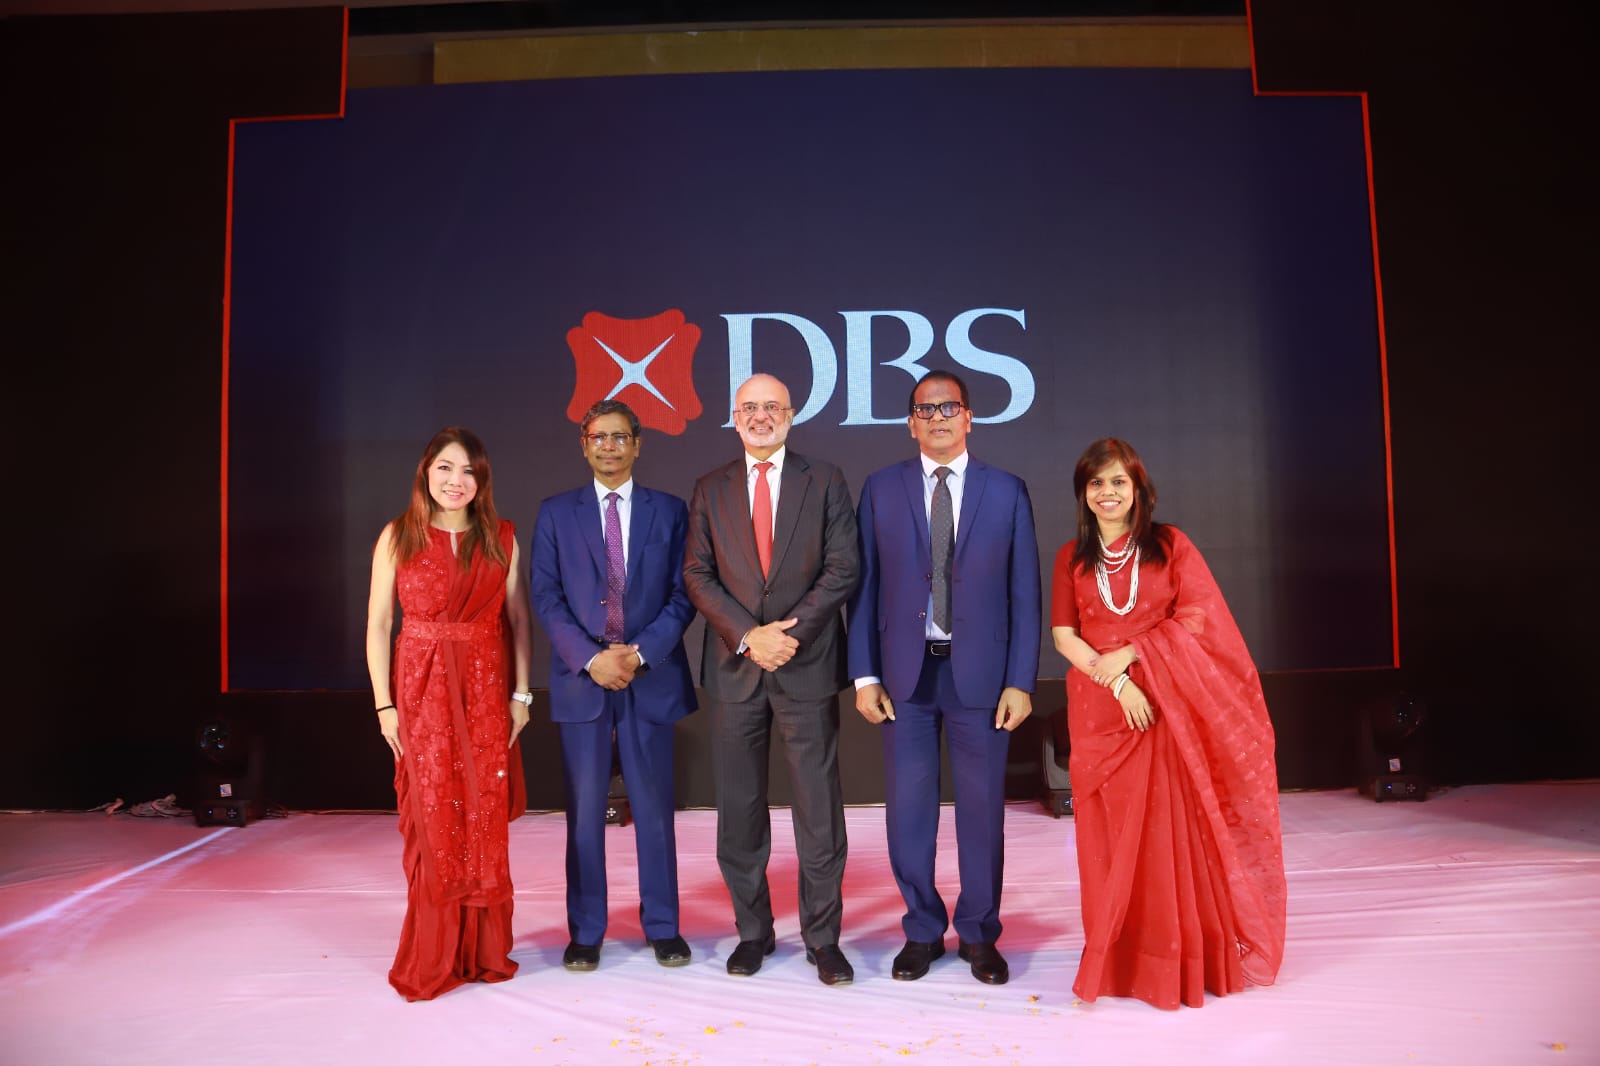 Bangladesh better poised to receive sustained trade, investment from rising regional giants: DBS CEO